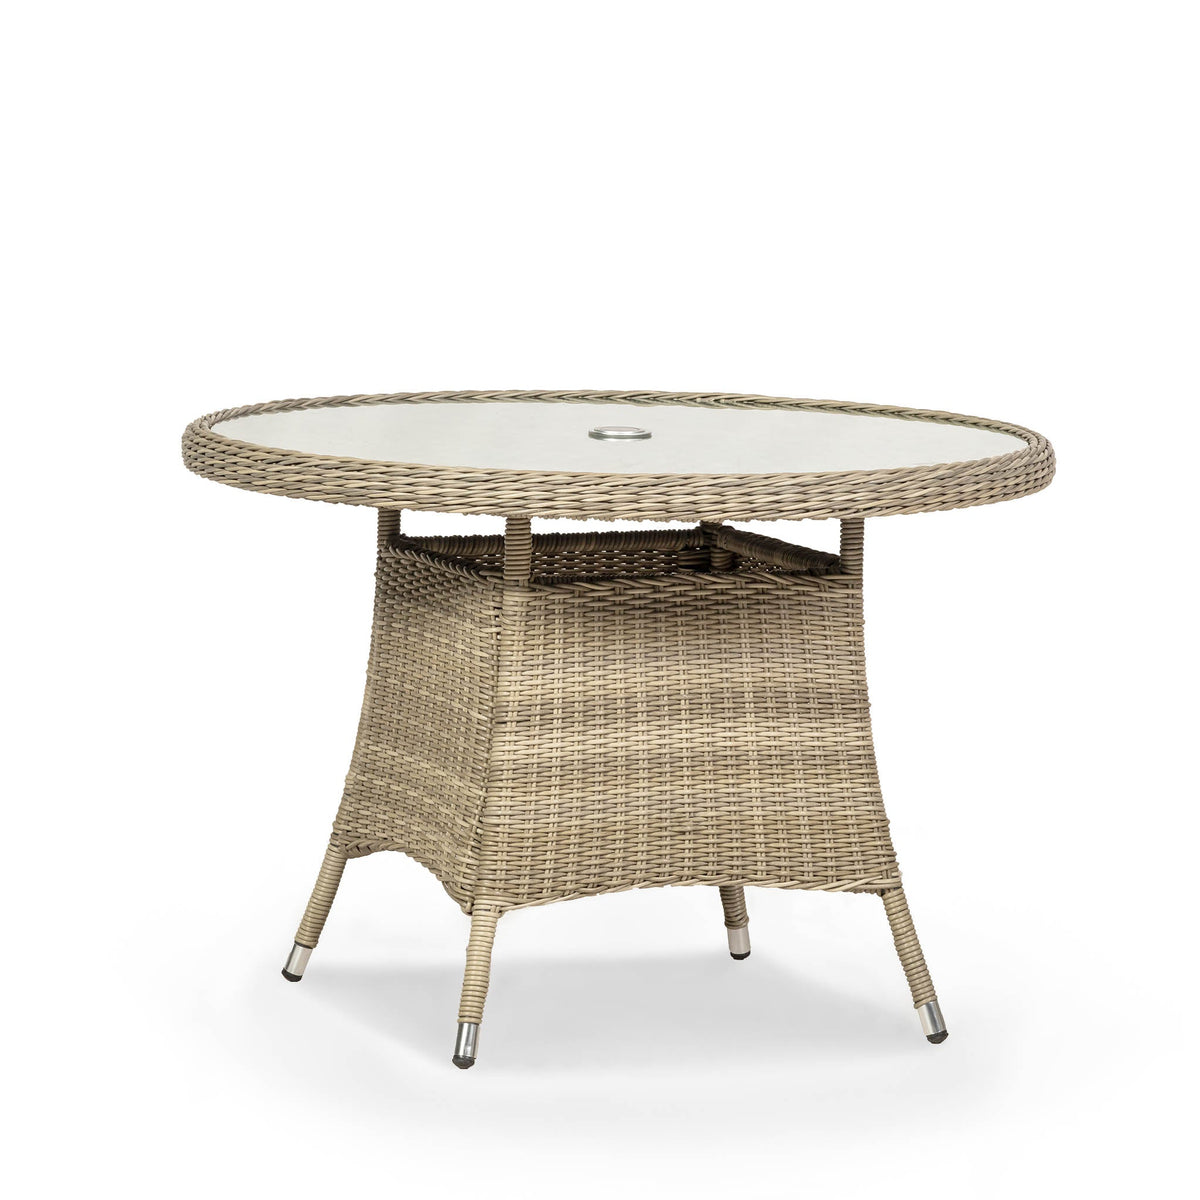 Wentworth 4 Seat 110cm Round Deluxe Rattan Dining Set Table